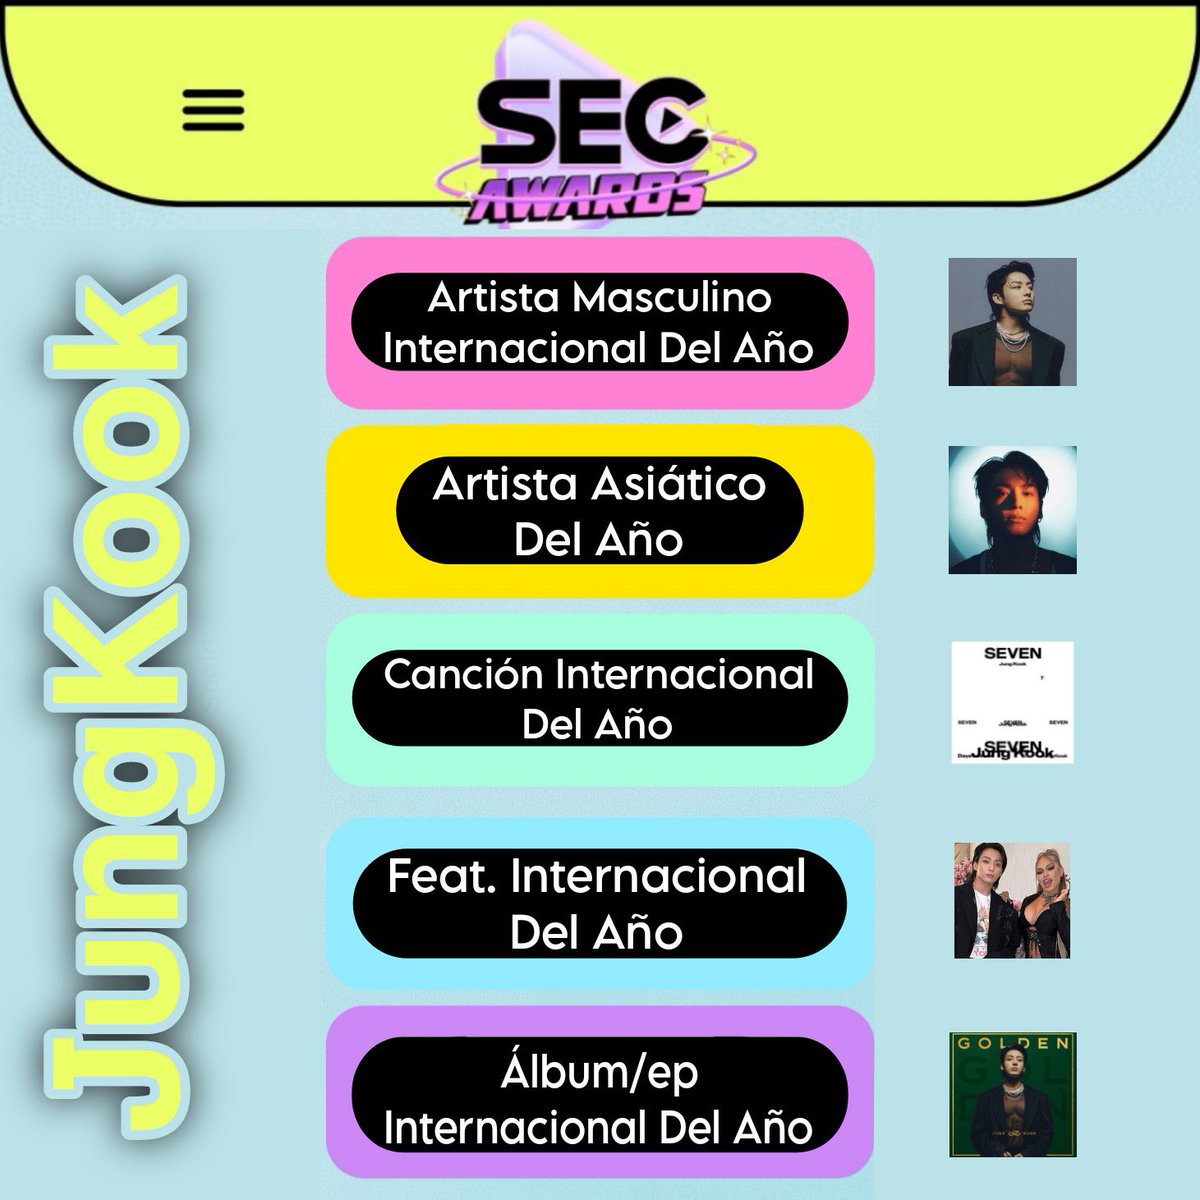 🗳️VOTE FOR JUNGKOOK ON SEC Awards 📍WEBSITE VOTING: UNLIMITED! ▪︎ International Feat Of The Year: 🗳️ secawards.seriesemcena.com.br/feat-internaci… ▪︎ International Music Of The Year: 🗳️ secawards.seriesemcena.com.br/musica-interna… ▪︎ International Album/EP Of The Year: 🗳️ secawards.seriesemcena.com.br/album-ep-inter… ▪︎ Asian…